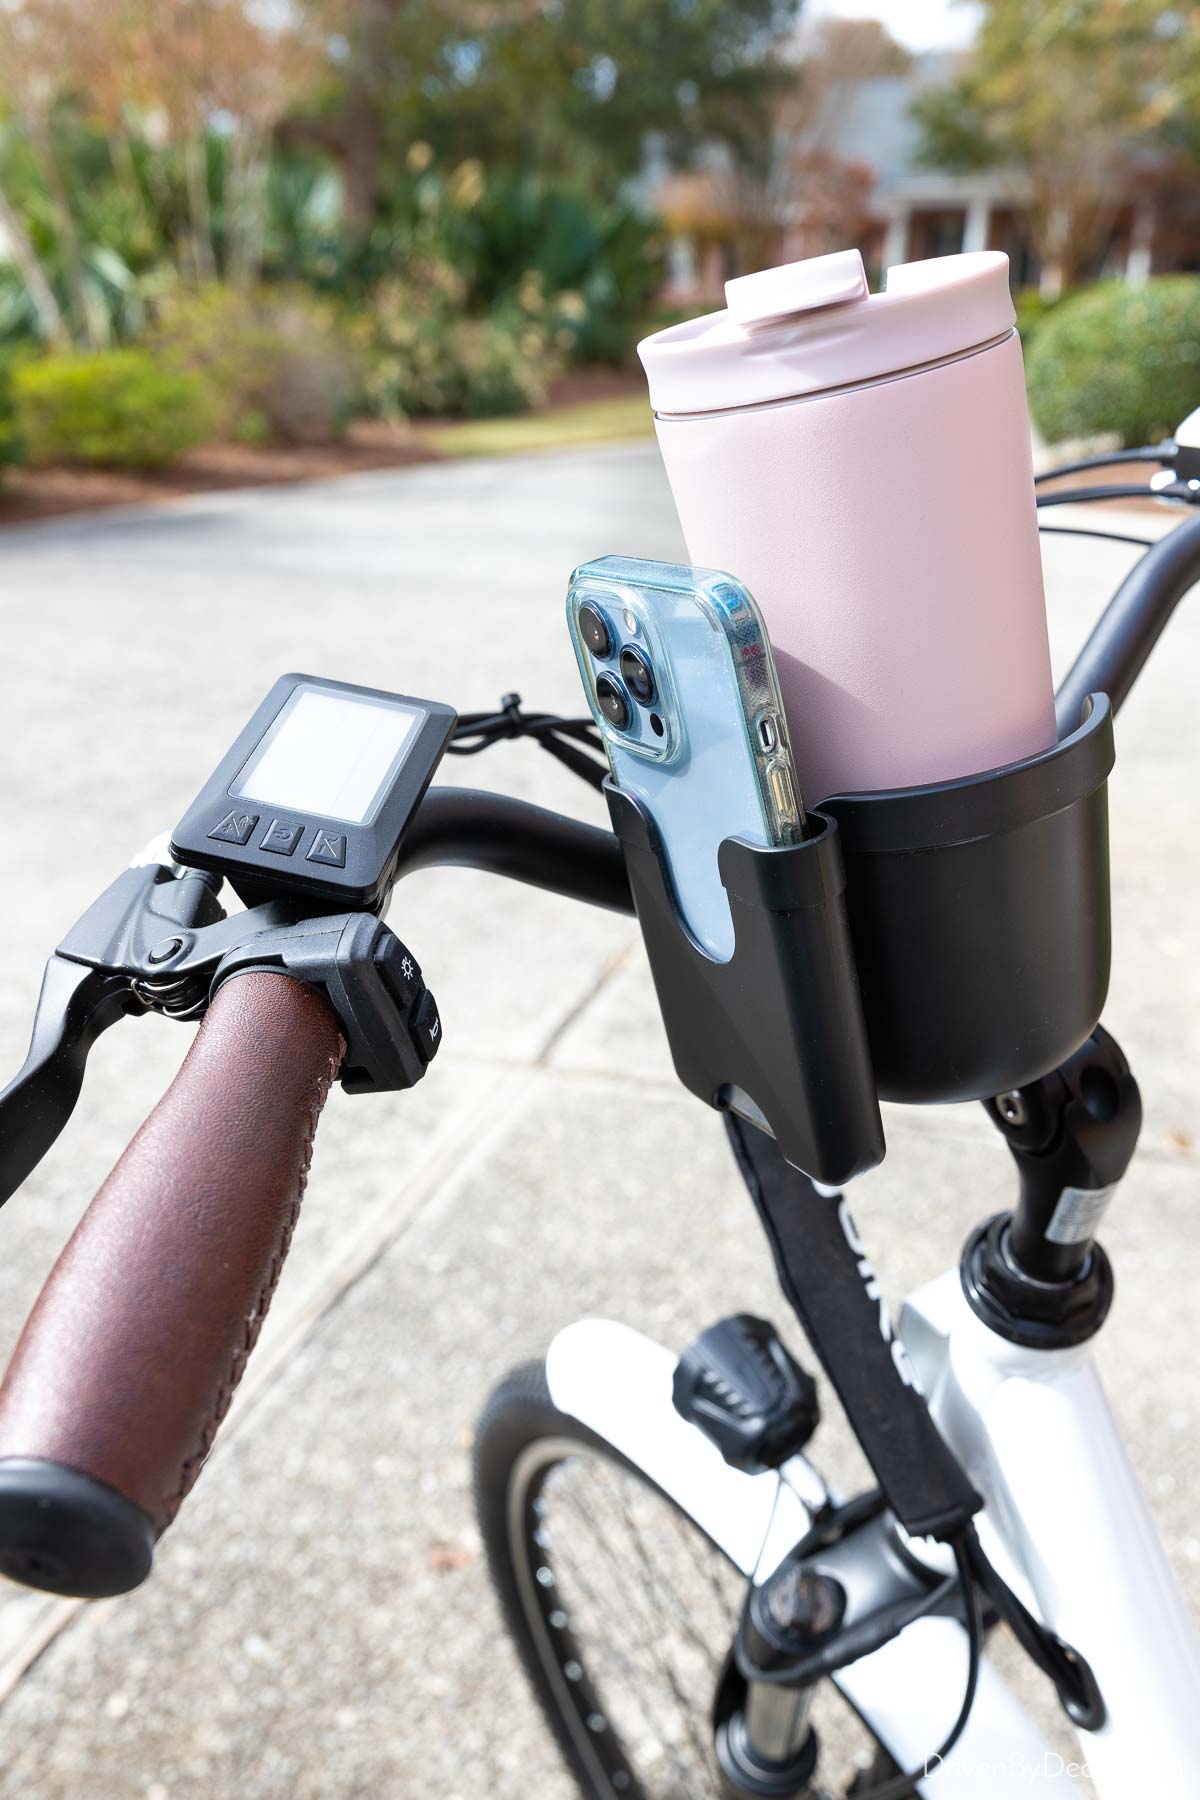 The phone and cup holder on my bicycle - such a great gift idea!